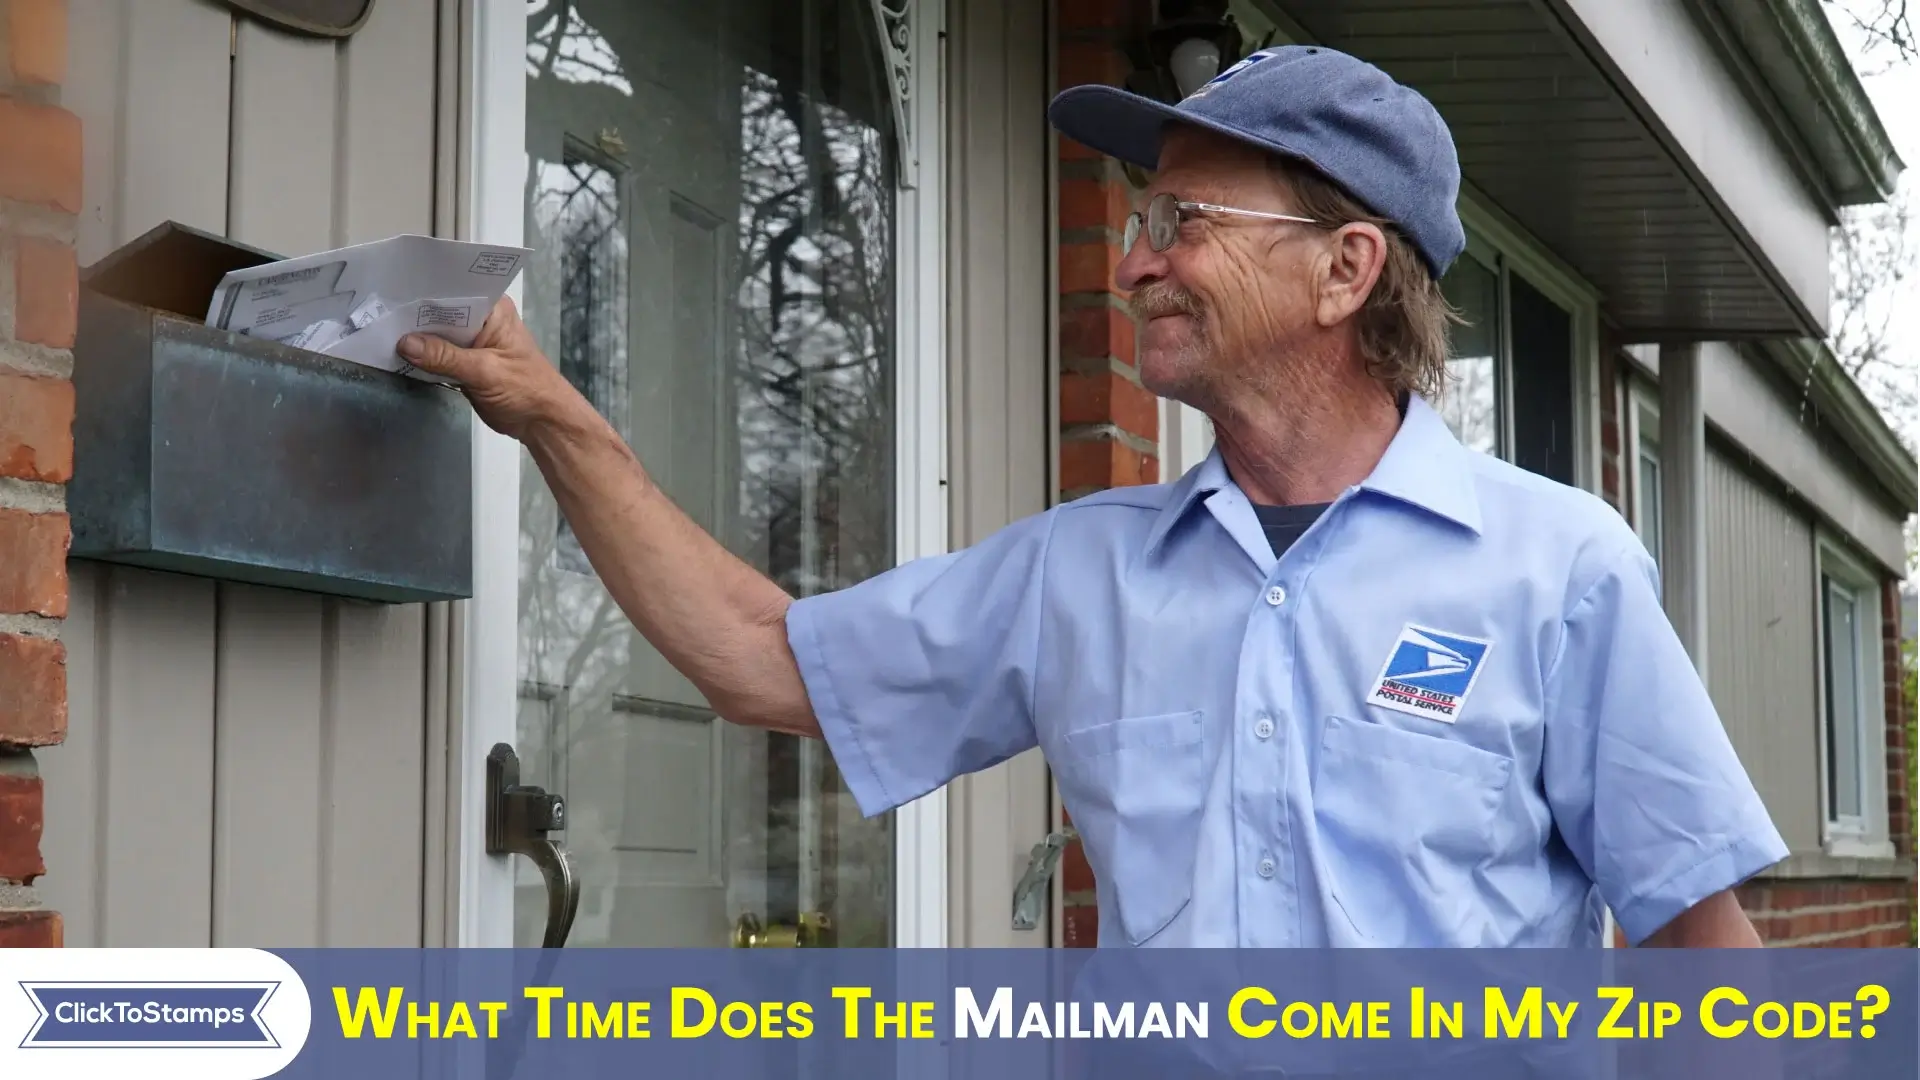 What time does the mailman come in my zip code